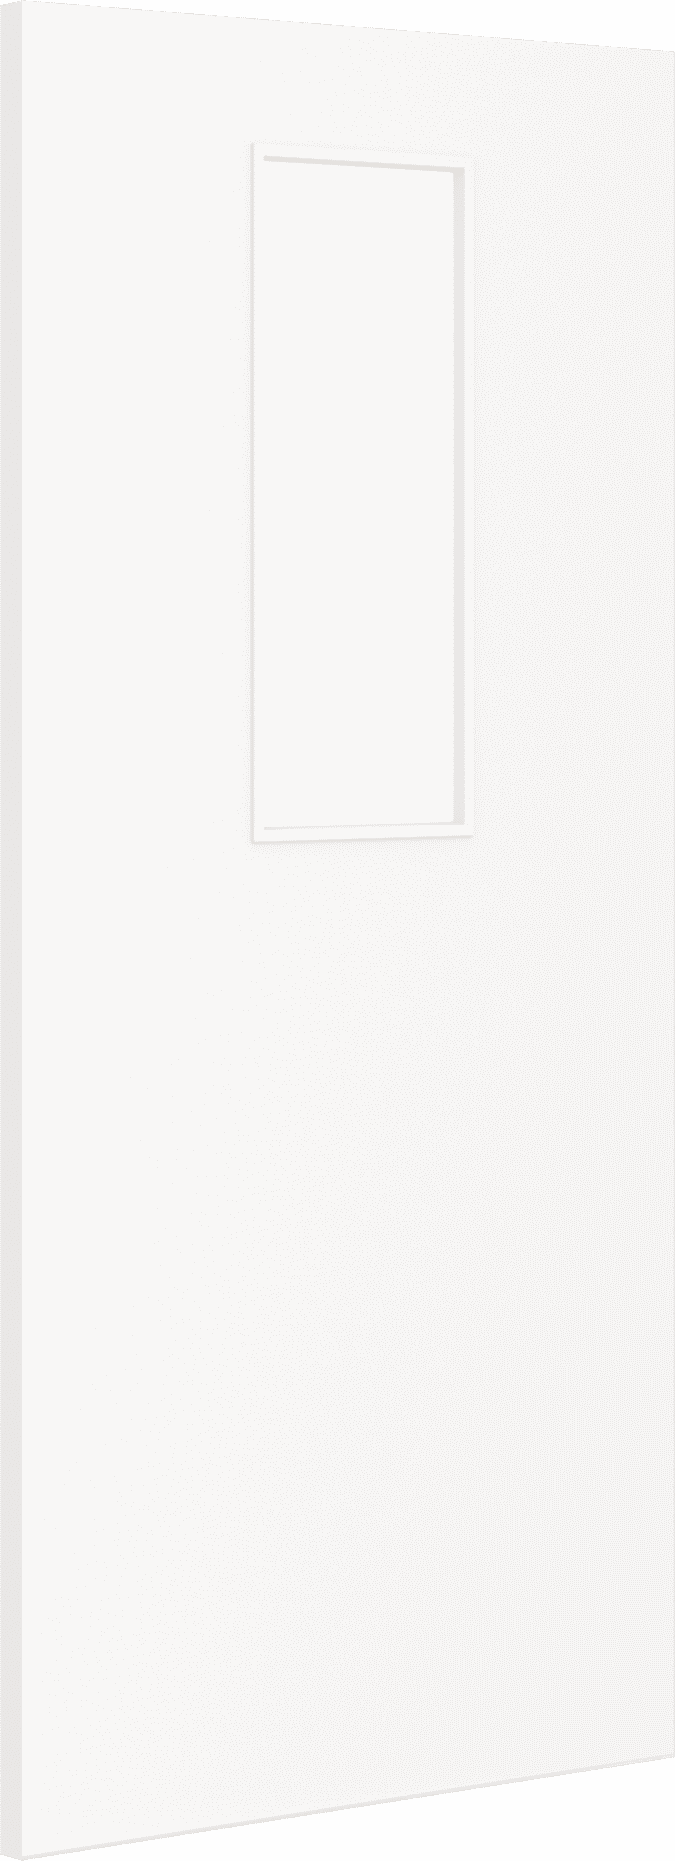 1981mm x 914mm x 44mm (36") Architectural Paint Grade White 14 Clear Glazed Fire Door Blank